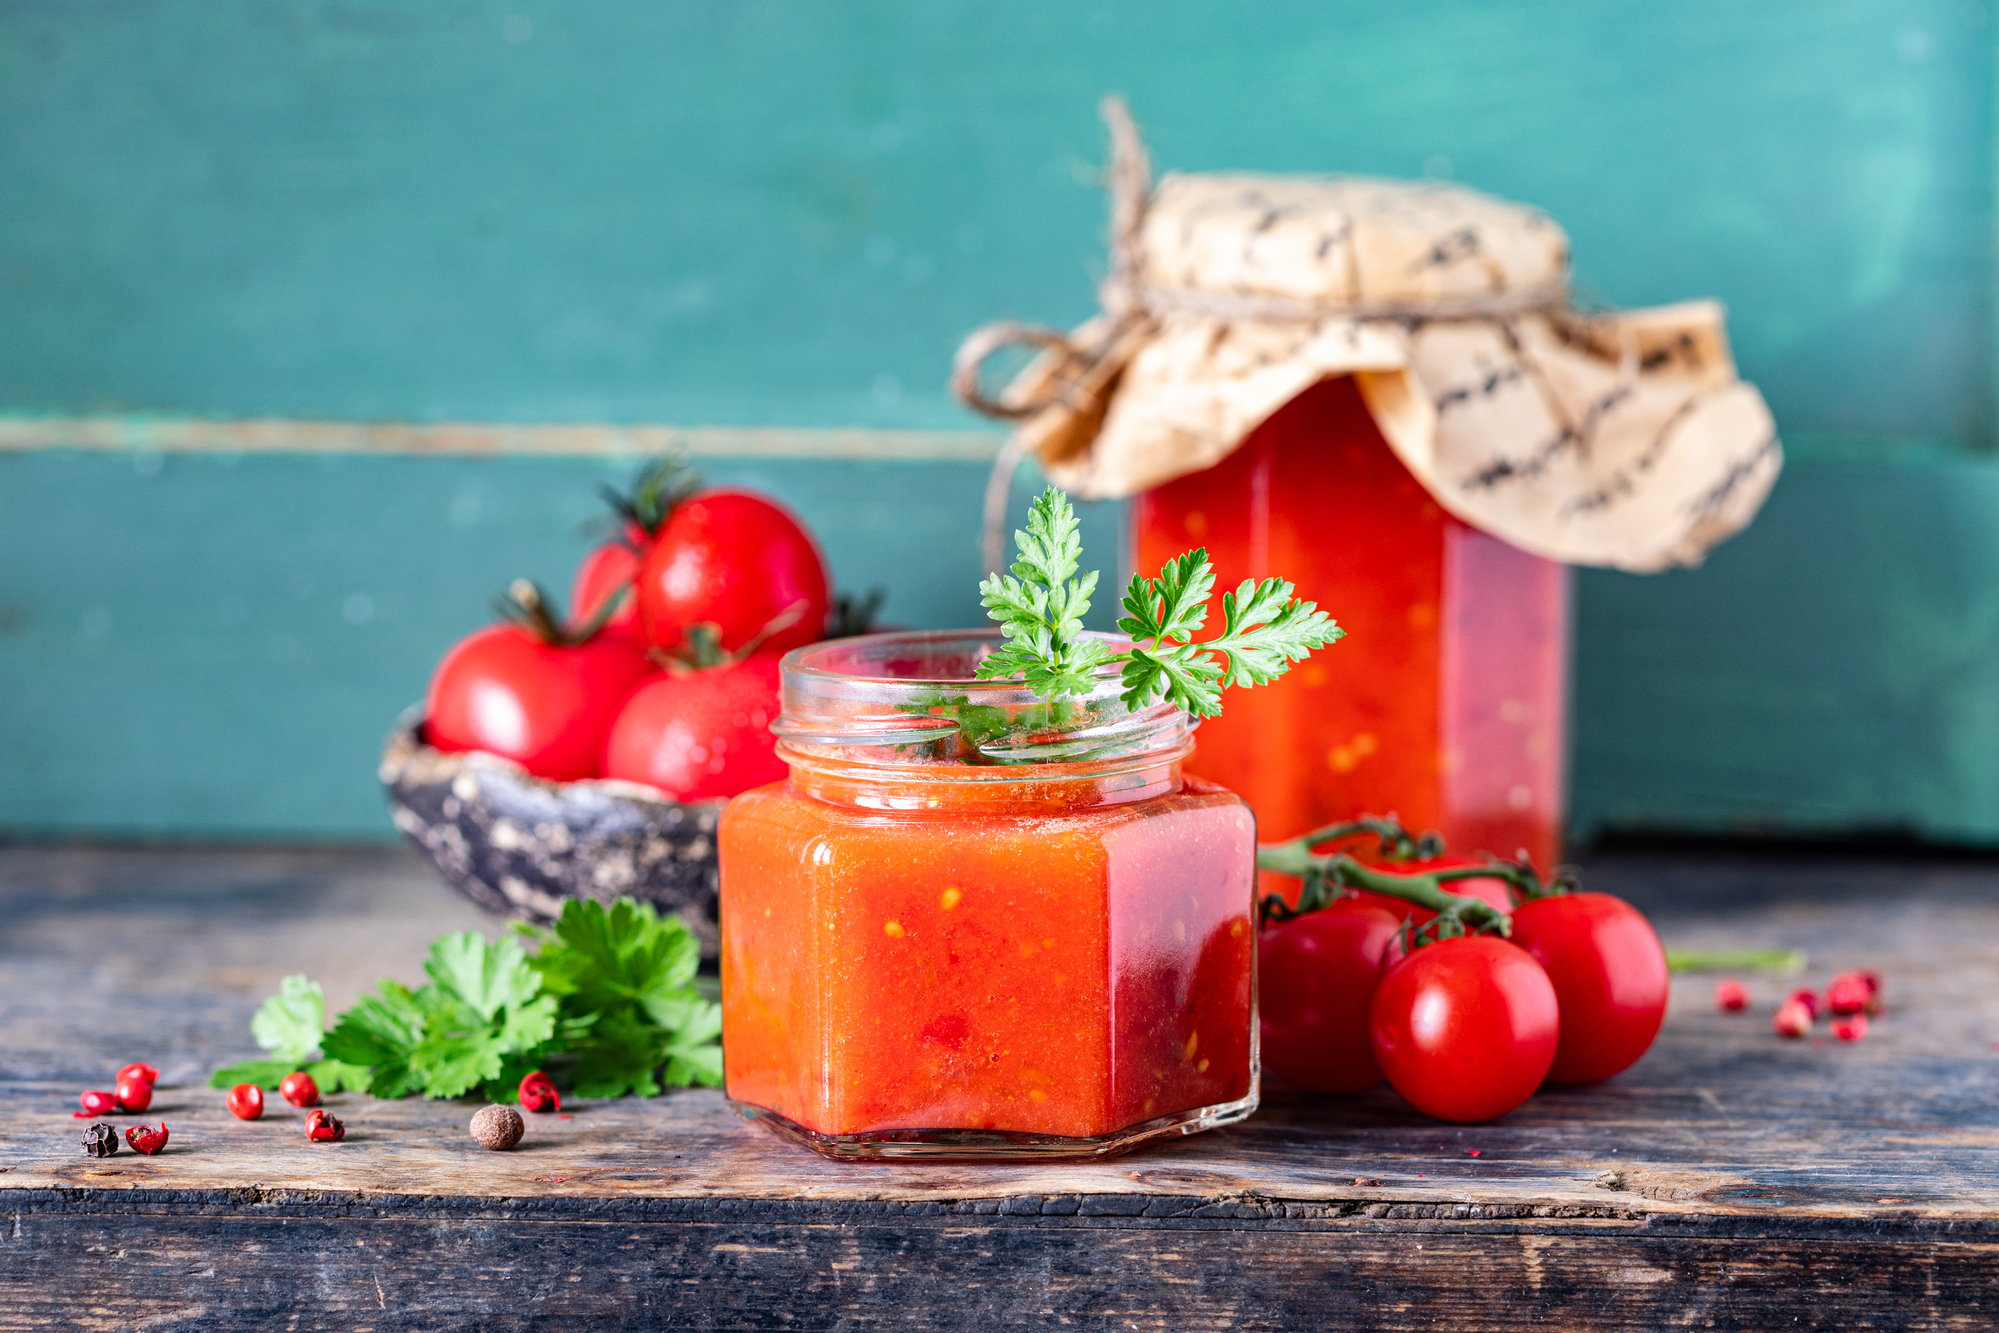 homemade tomato ketchup made from ripe red tomatoes in glass jars with ingredients on an old wooden table.